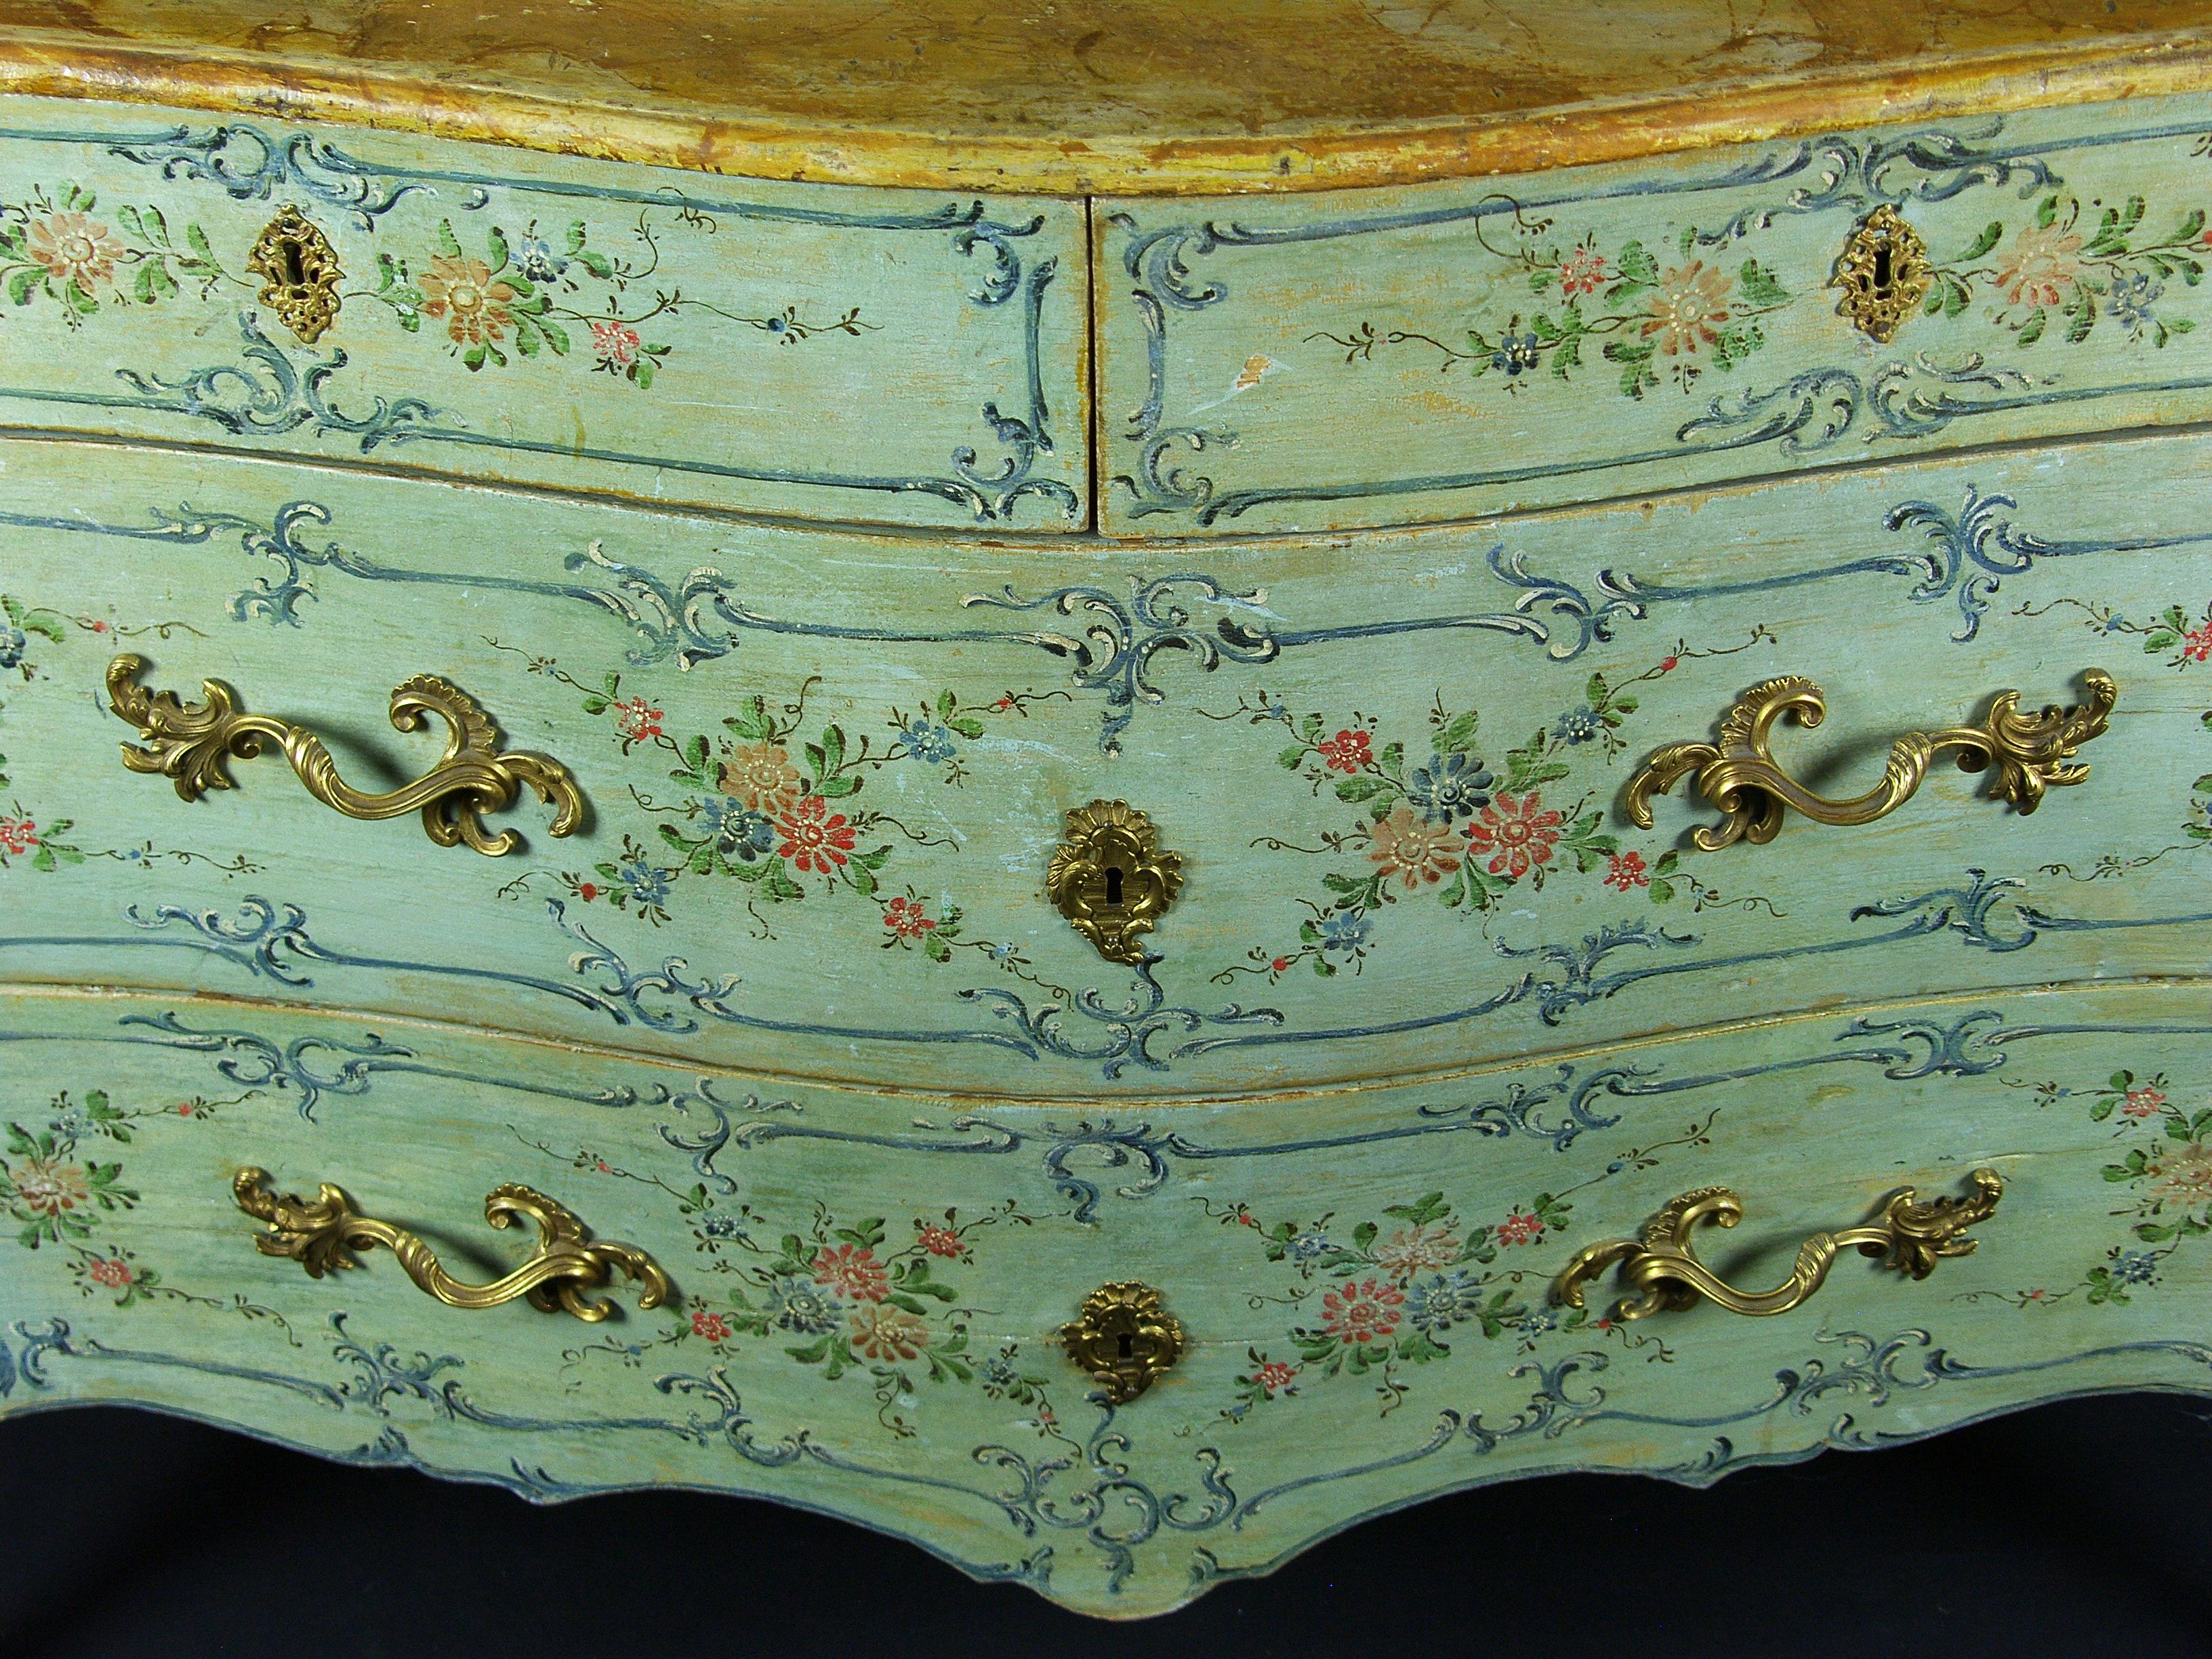 18th Century Italian Polychrome Lacquered Wooden Dresser with Floral Decorations 6